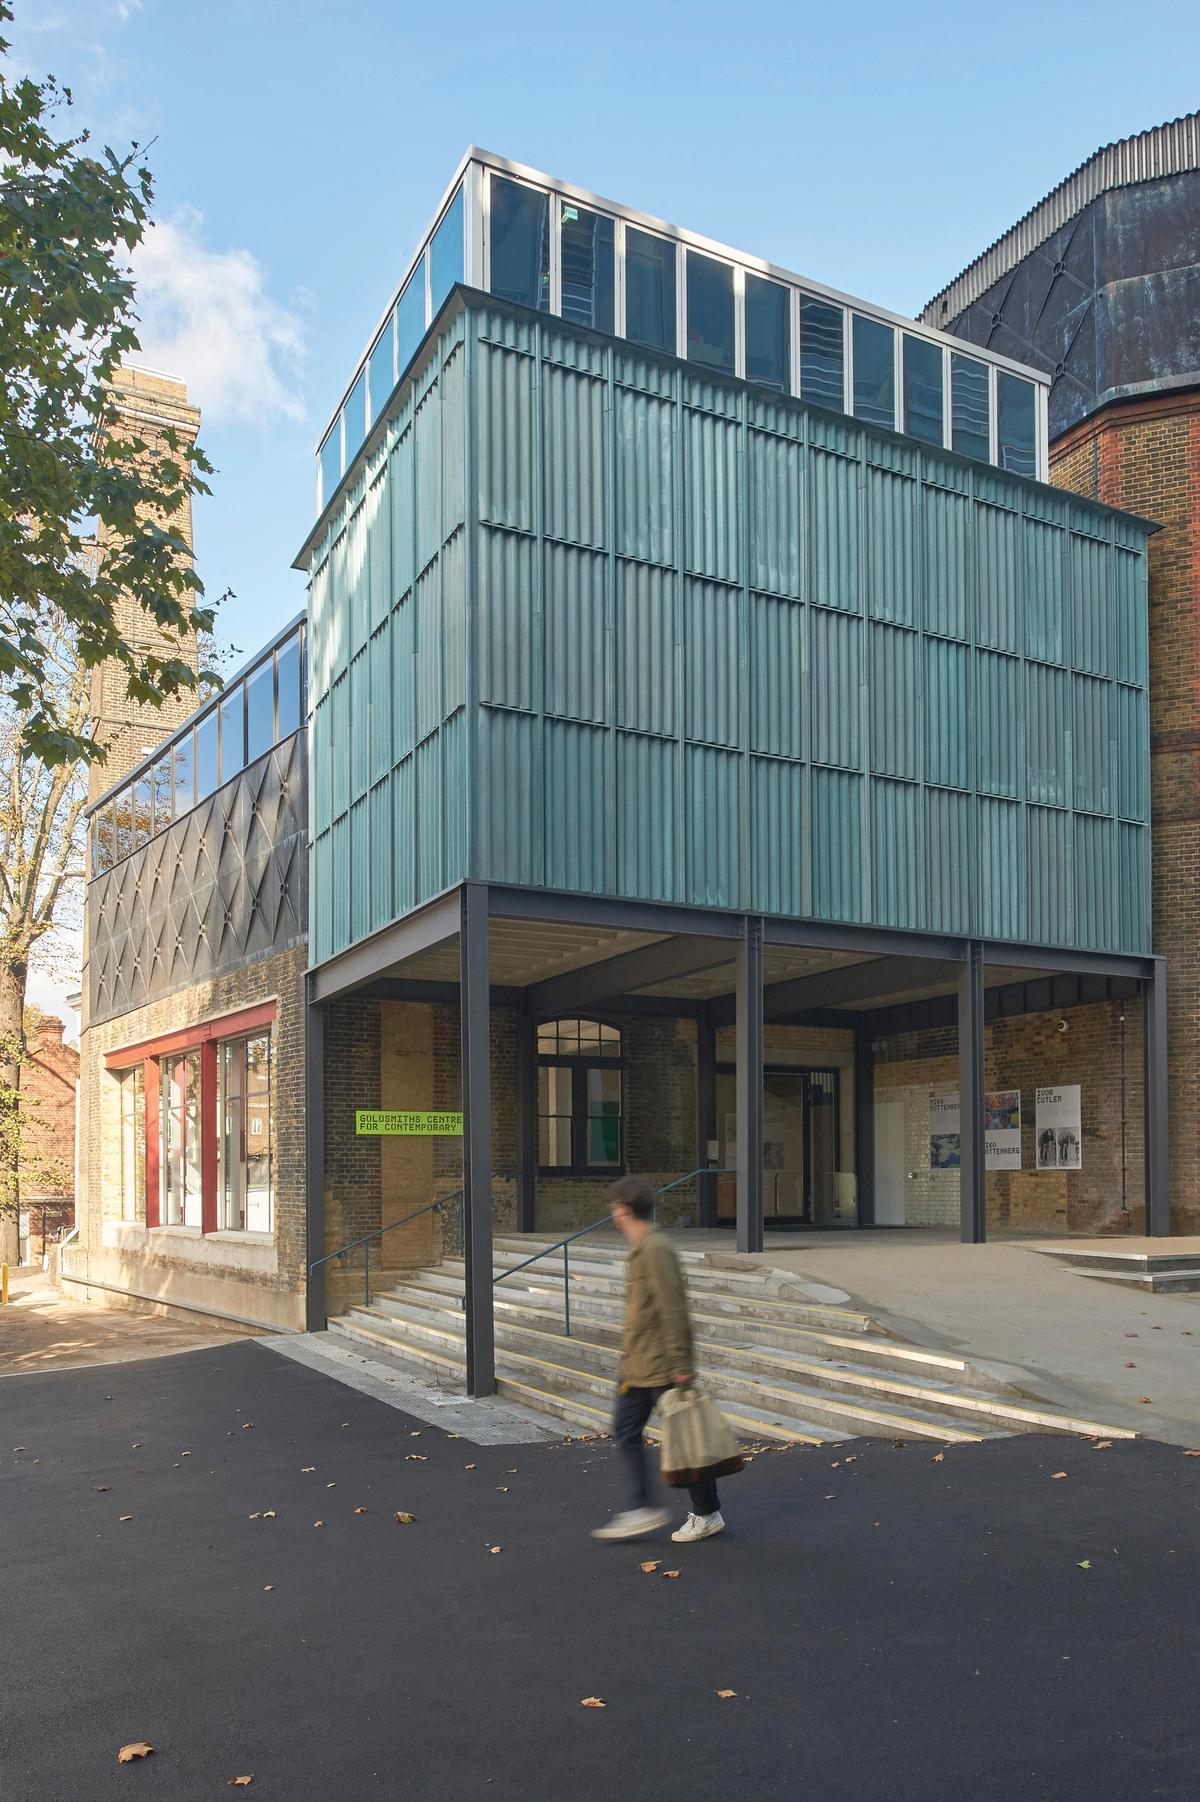 Goldsmiths CCA in south London has closed its doors until the autumn, following protests at the venue about the war in Gaza, and the institution’s links to donors said to be close to the Israeli prime minister © Joanne Underhill/Alamy Stock Photo